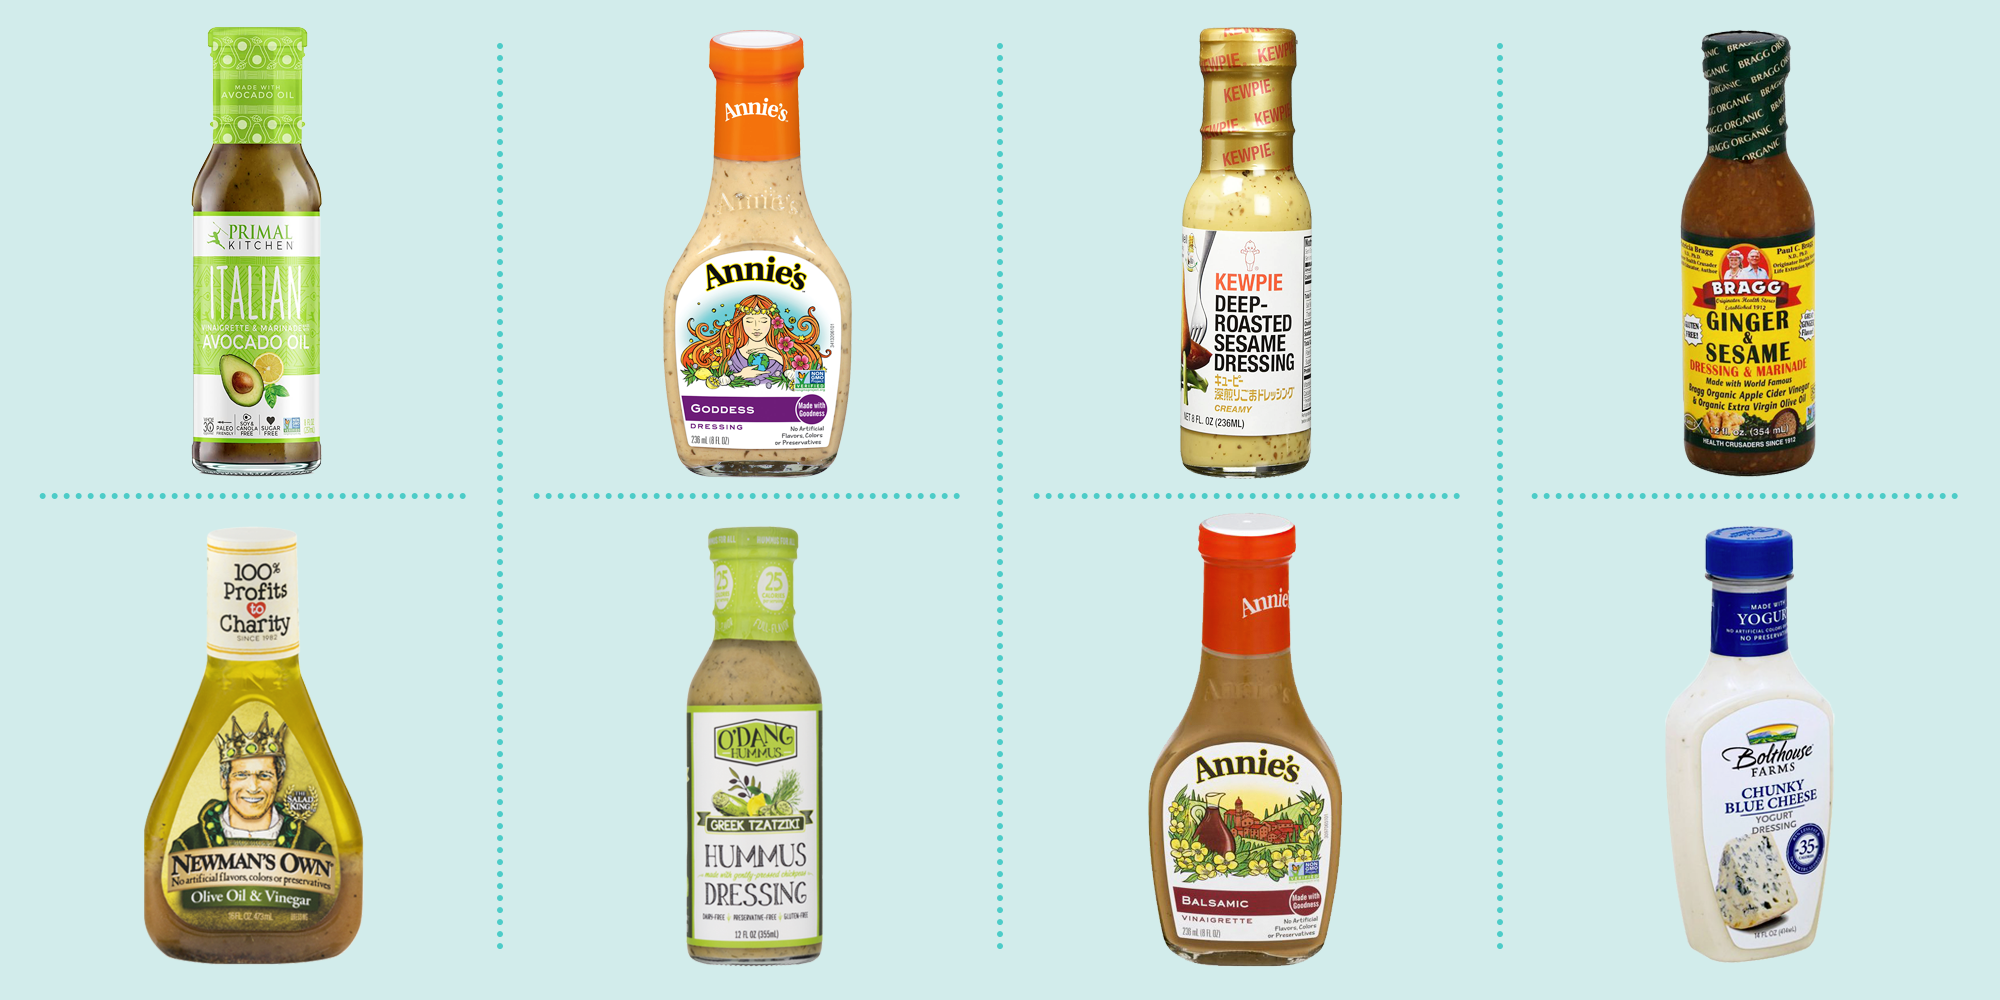 Best Salad Dressing Shaker For Mixing Up Homemade Dressings